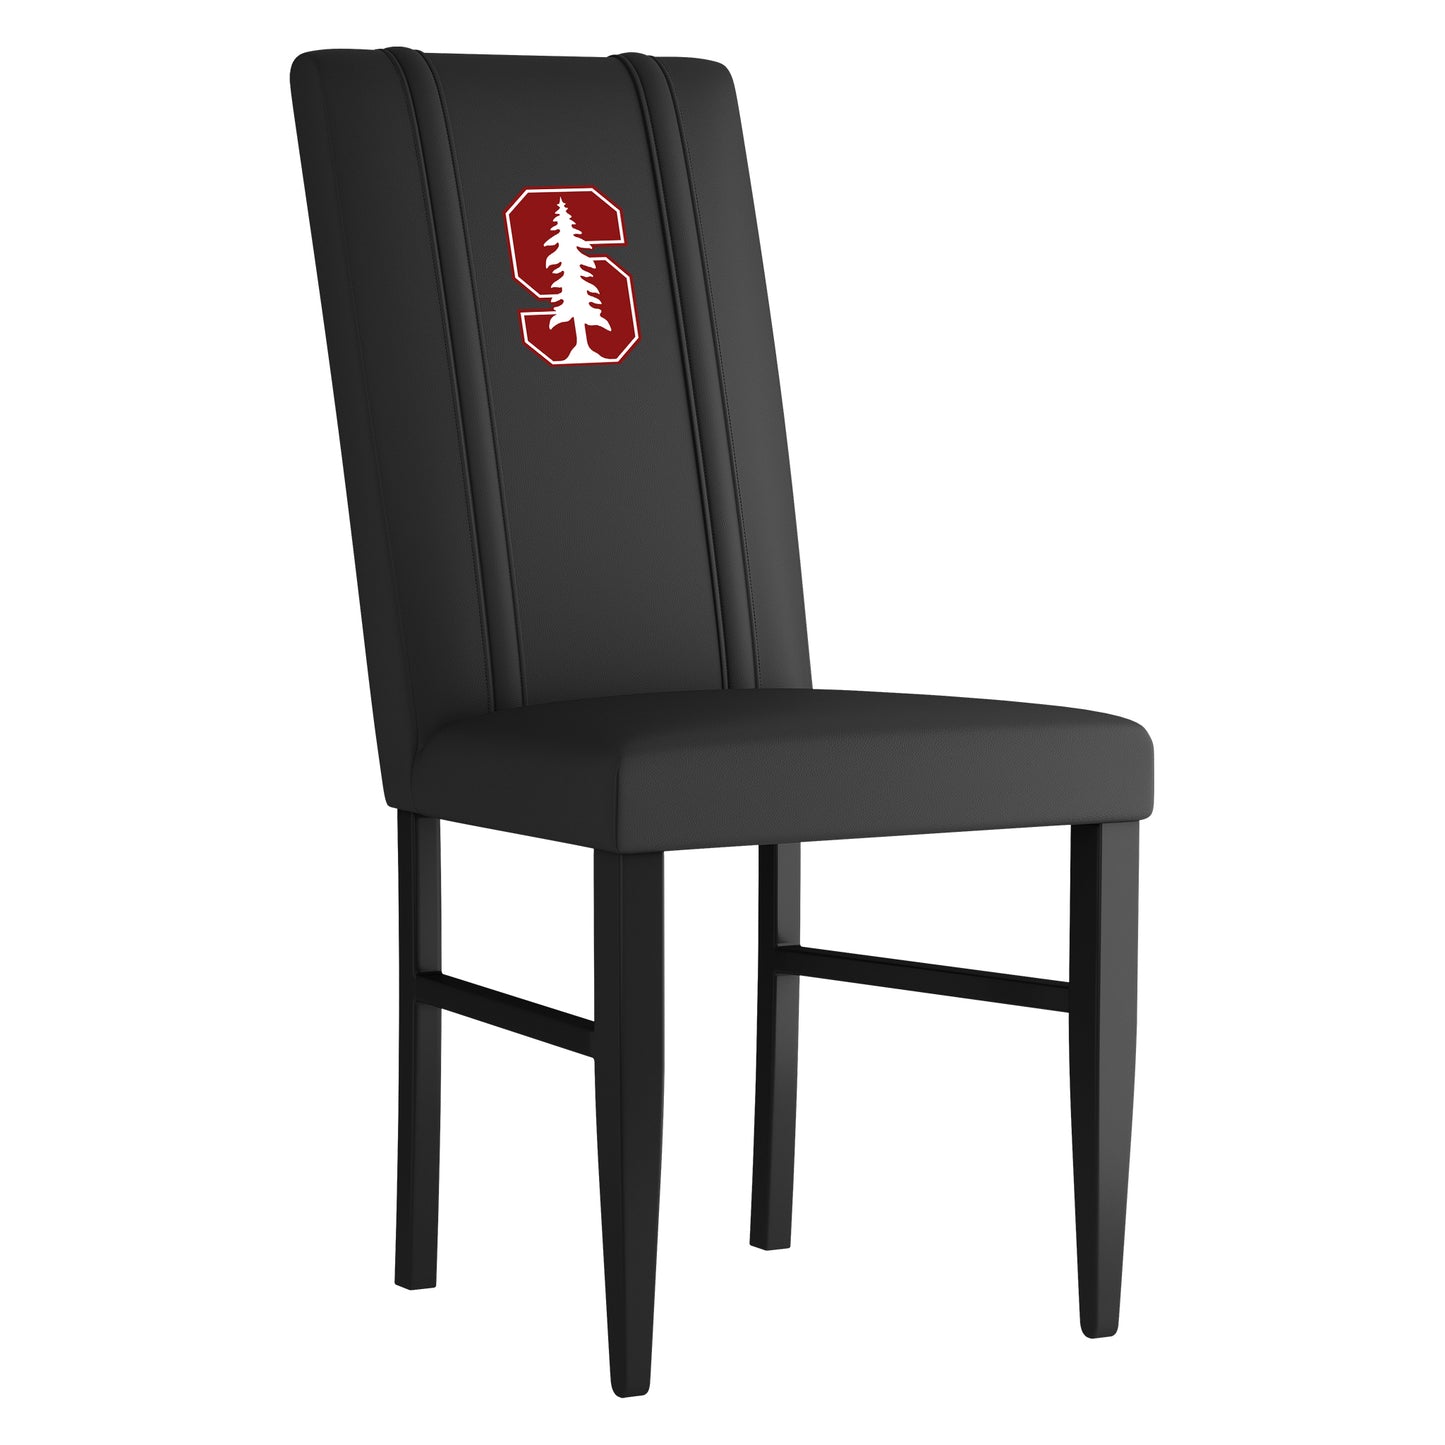 Side Chair 2000 with Stanford Cardinals Logo Set of 2